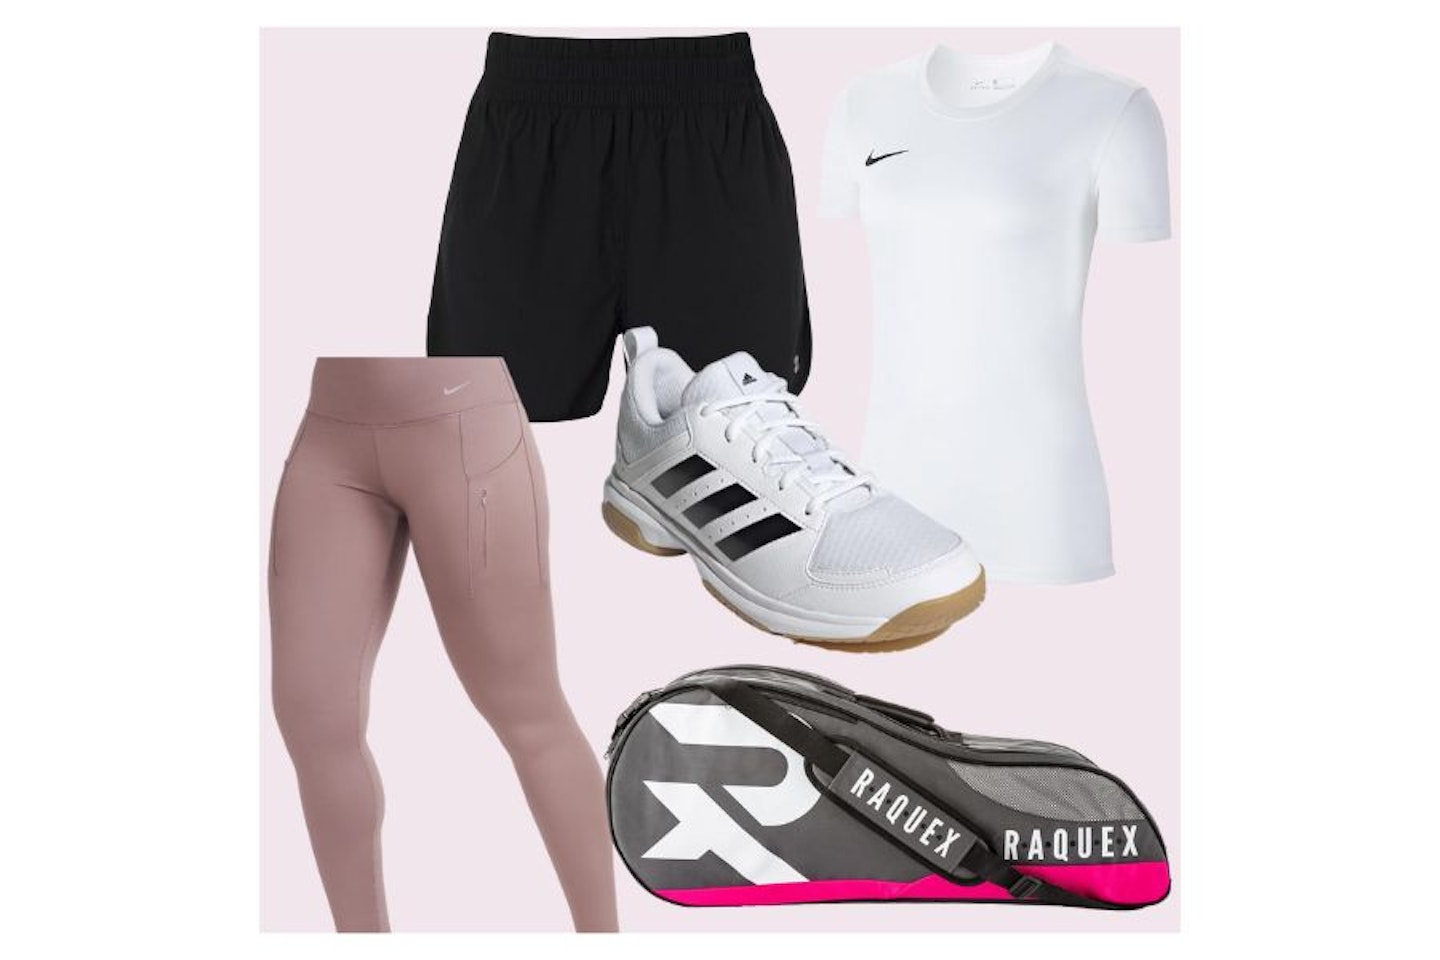 A example badminton outfit for women, including trainers, leggings, shorts, top and bag.